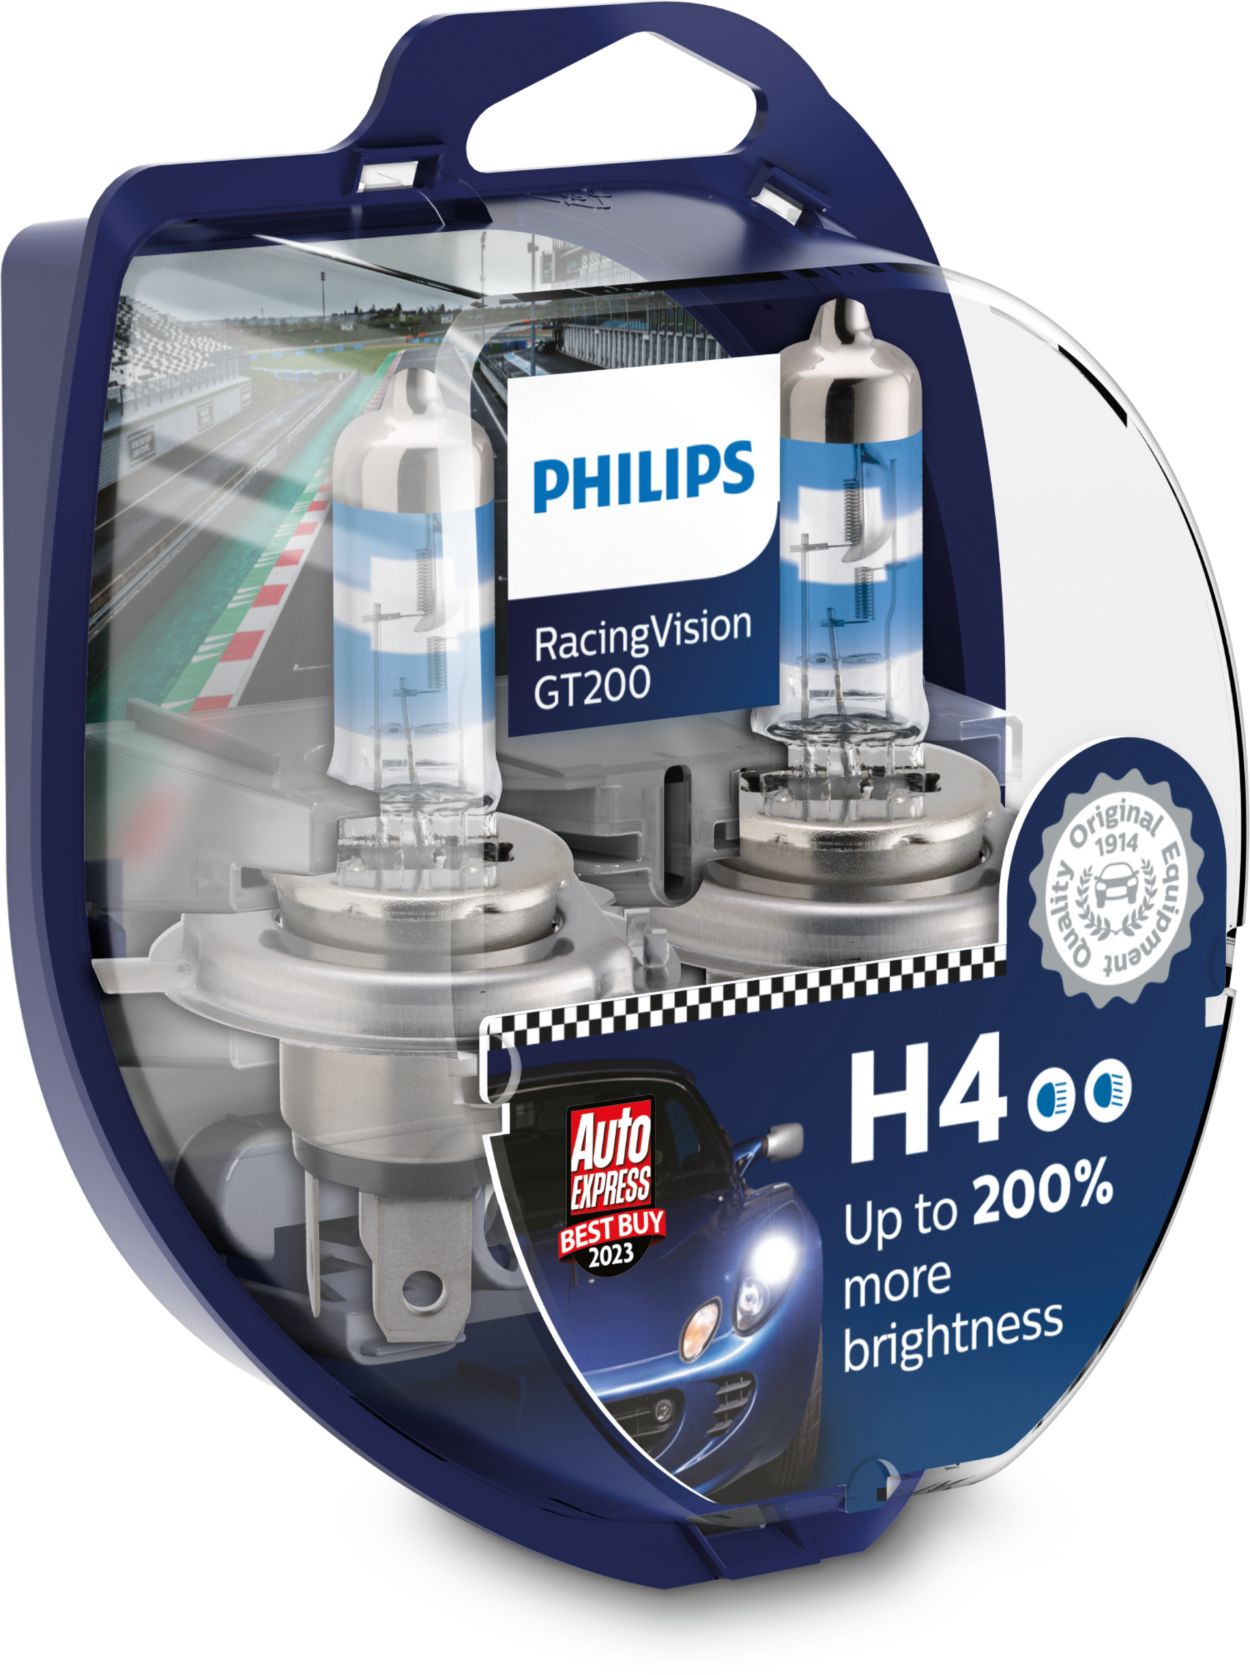 https://images.philips.com/is/image/philipsconsumer/57b3983567604a43833dafe4008c5f66?$jpglarge$&wid=1250